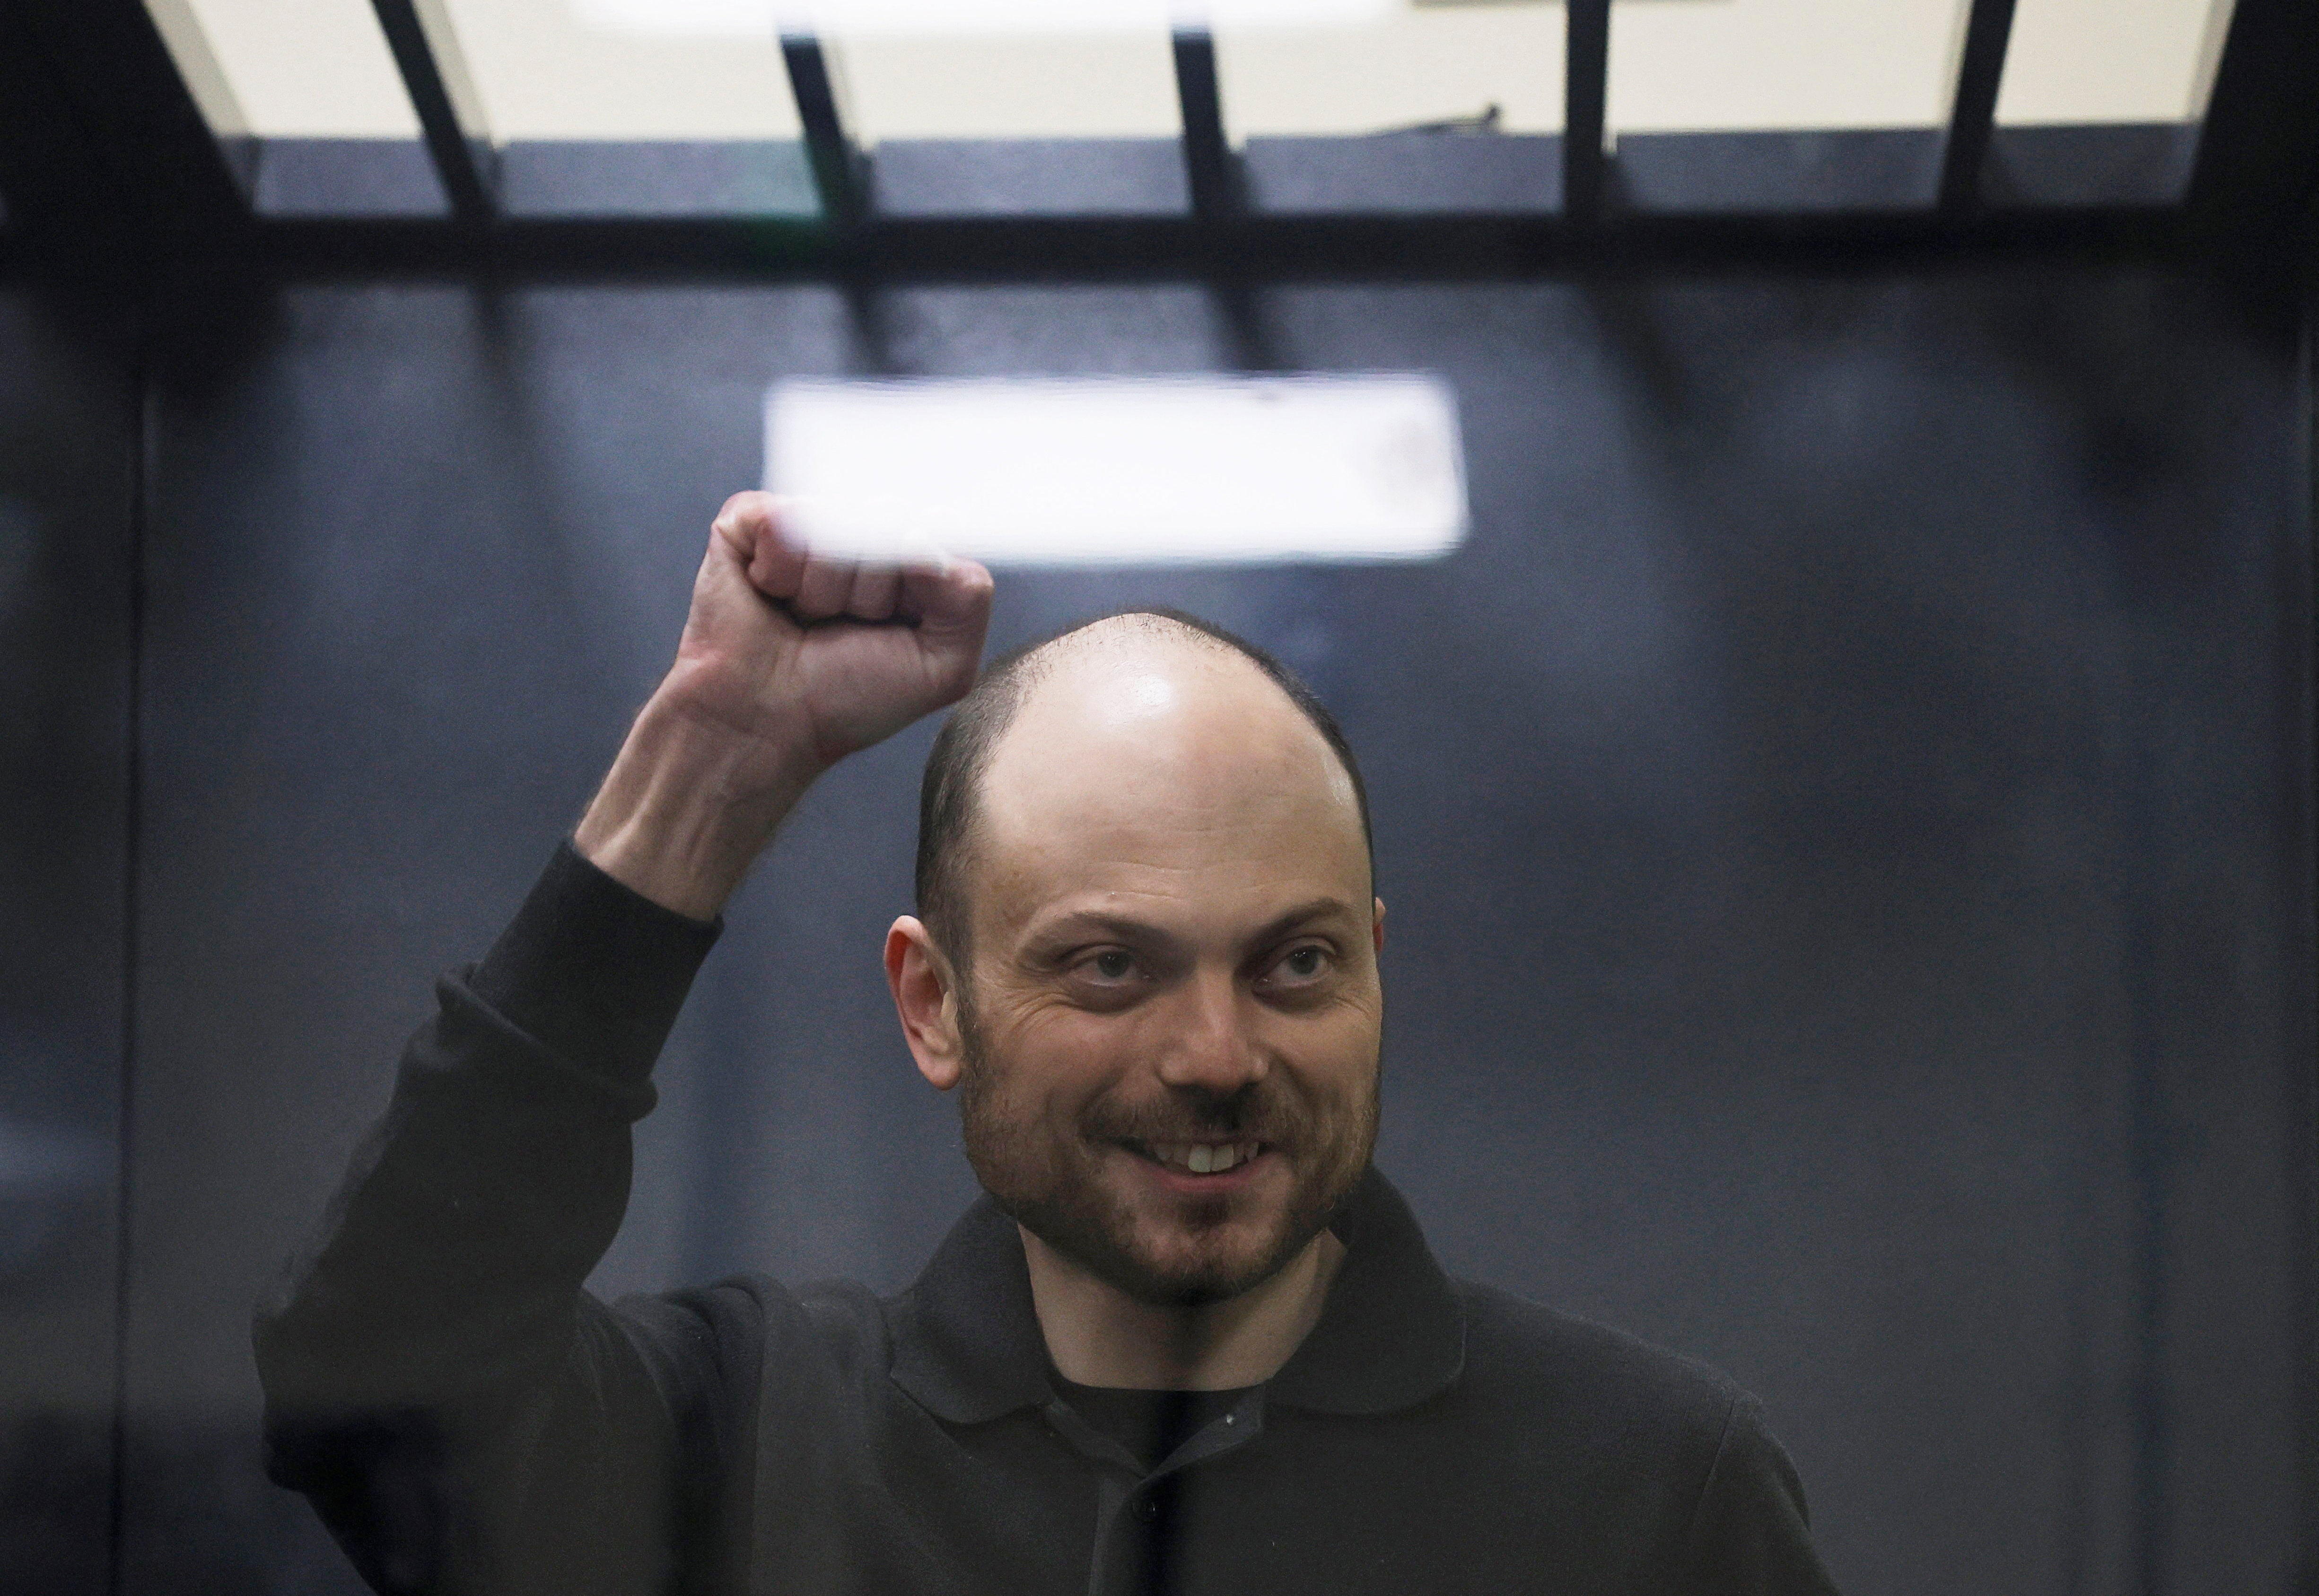 Jailed Russian opposition figure Vladimir Kara-Murza gestures as he stands behind a glass wall of an enclosure for defendants during a court hearing to consider an appeal against his prison sentence, in Moscow, Russia 31 July 2023